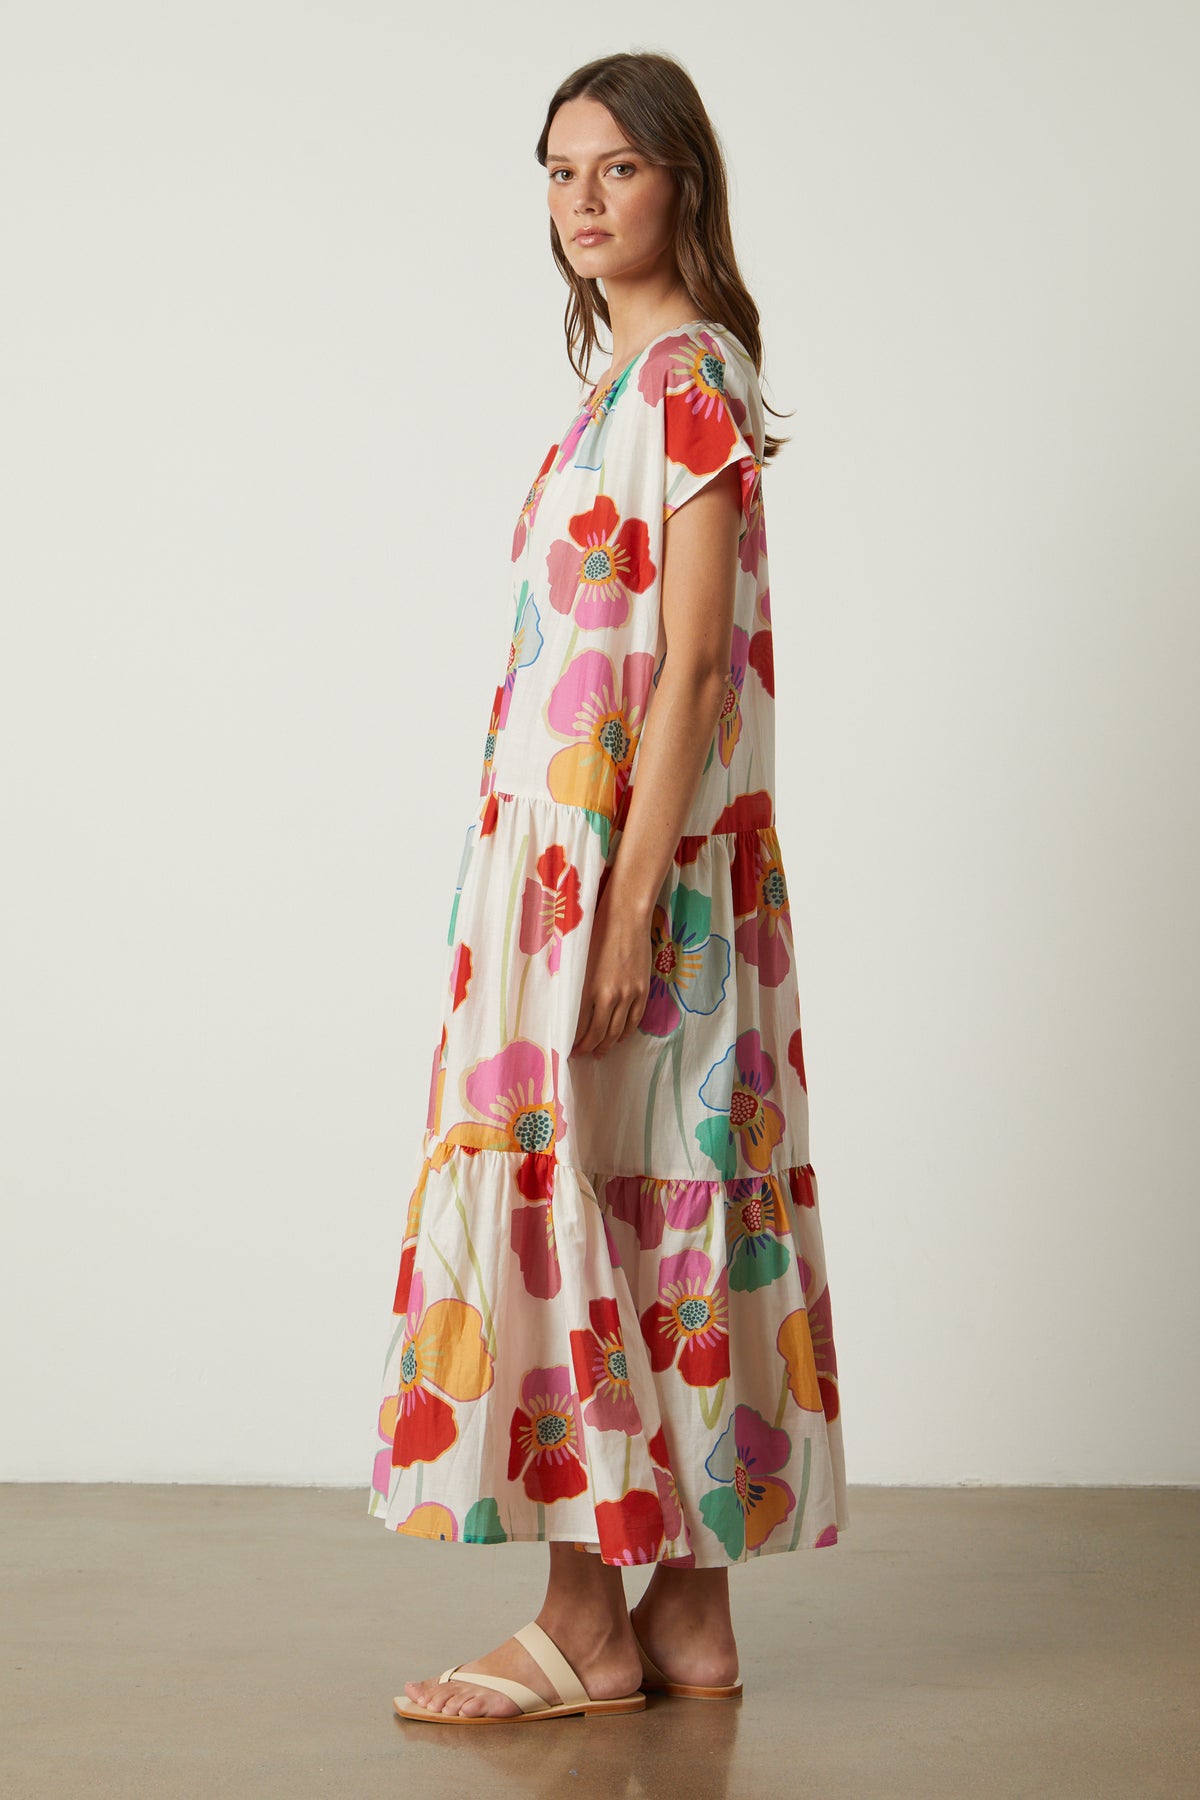 A woman wearing a multi-colored floral Savannah Printed Maxi Dress by Velvet by Graham & Spencer.-26317107953857